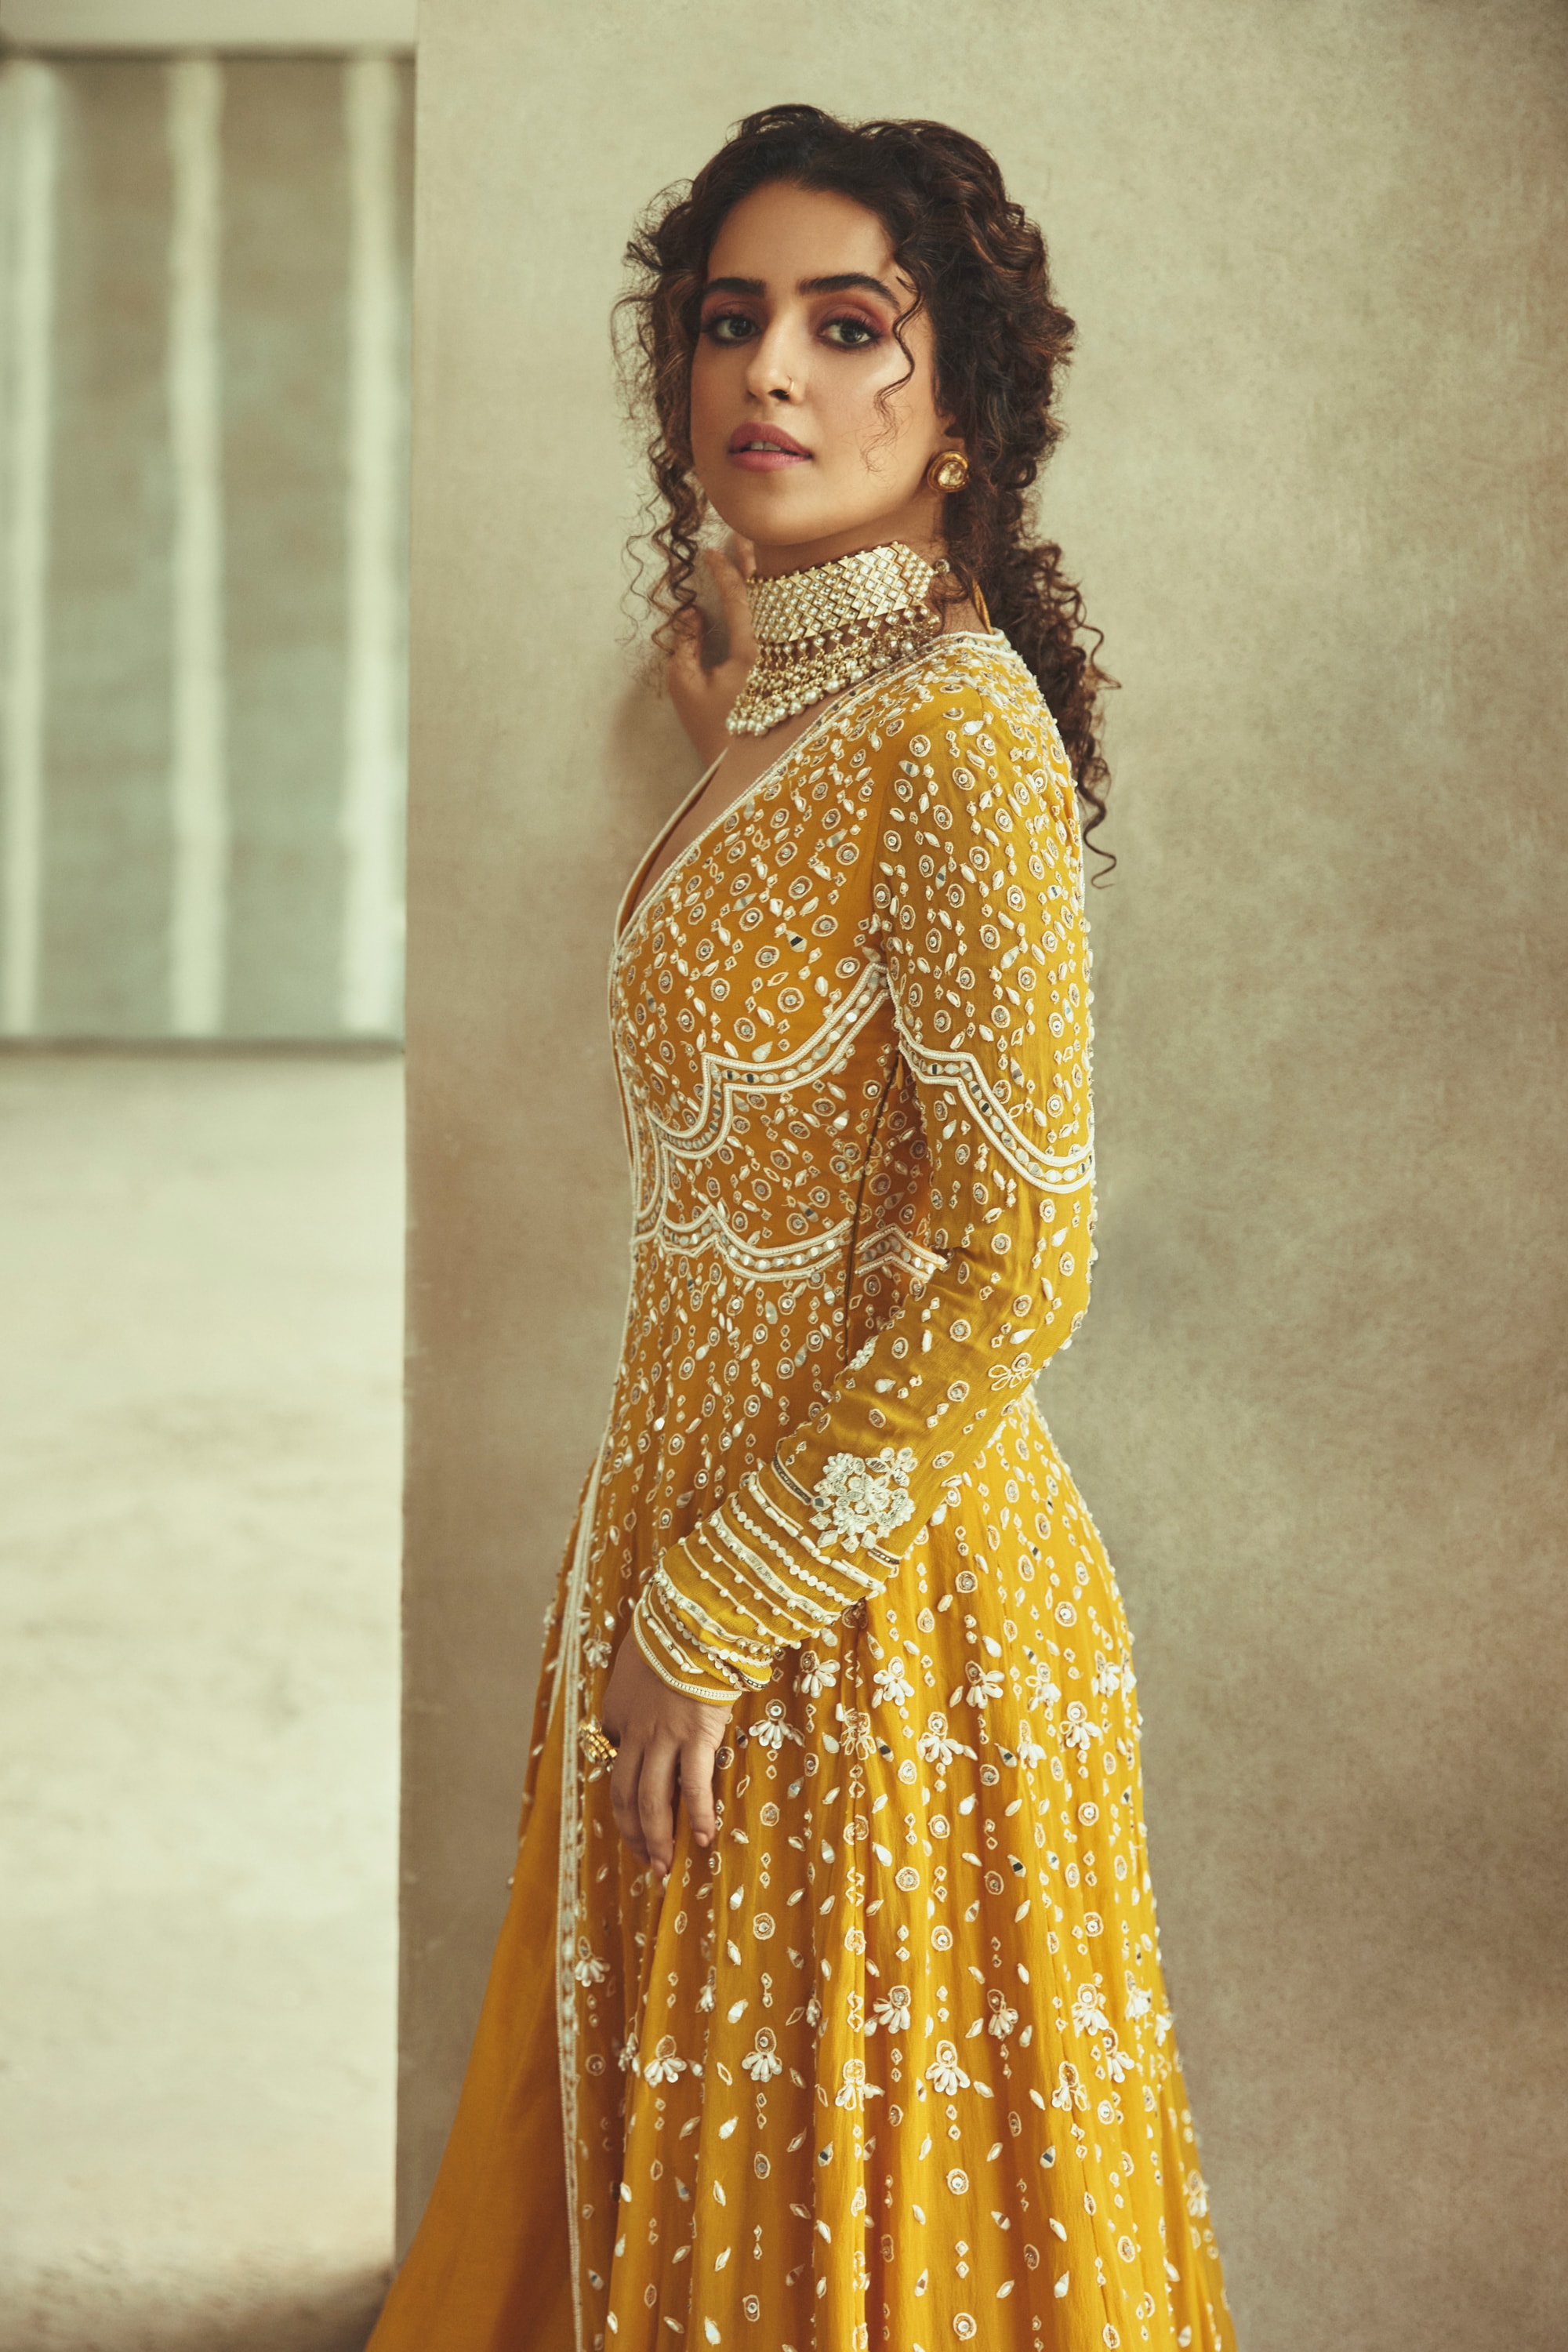 Sanya_Malhotra_in_Ridhi_Mehra_Golden_yellow_anarkali_with_floral_embroidered_motifs